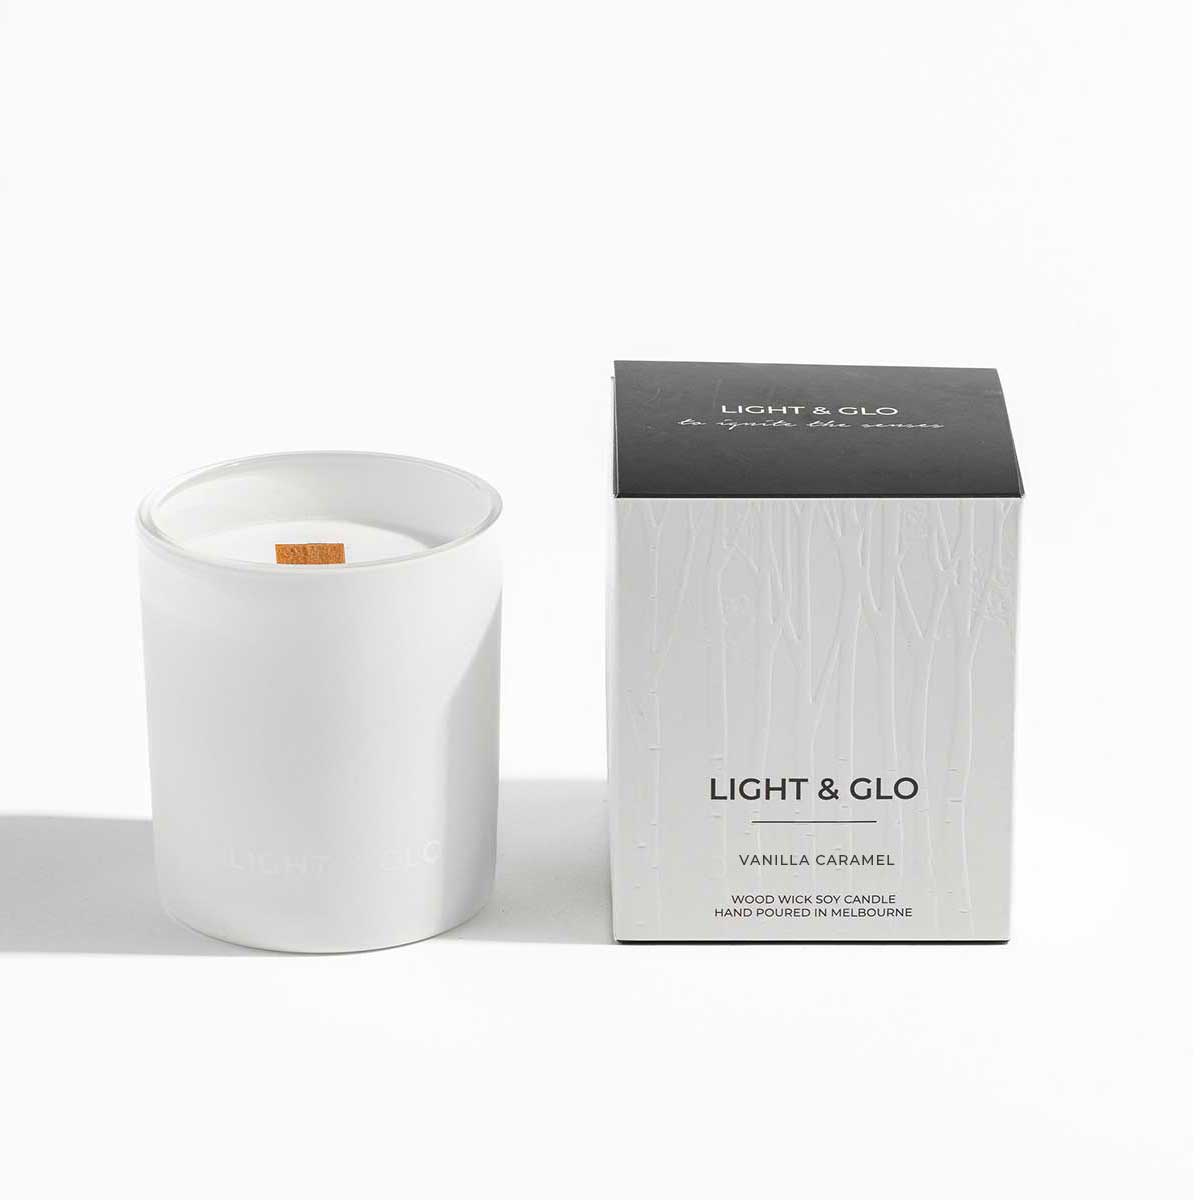 Vanilla Caramel - Monochrome Large 300g Candle | Luxury Candles & Home Fragrances by Light + Glo